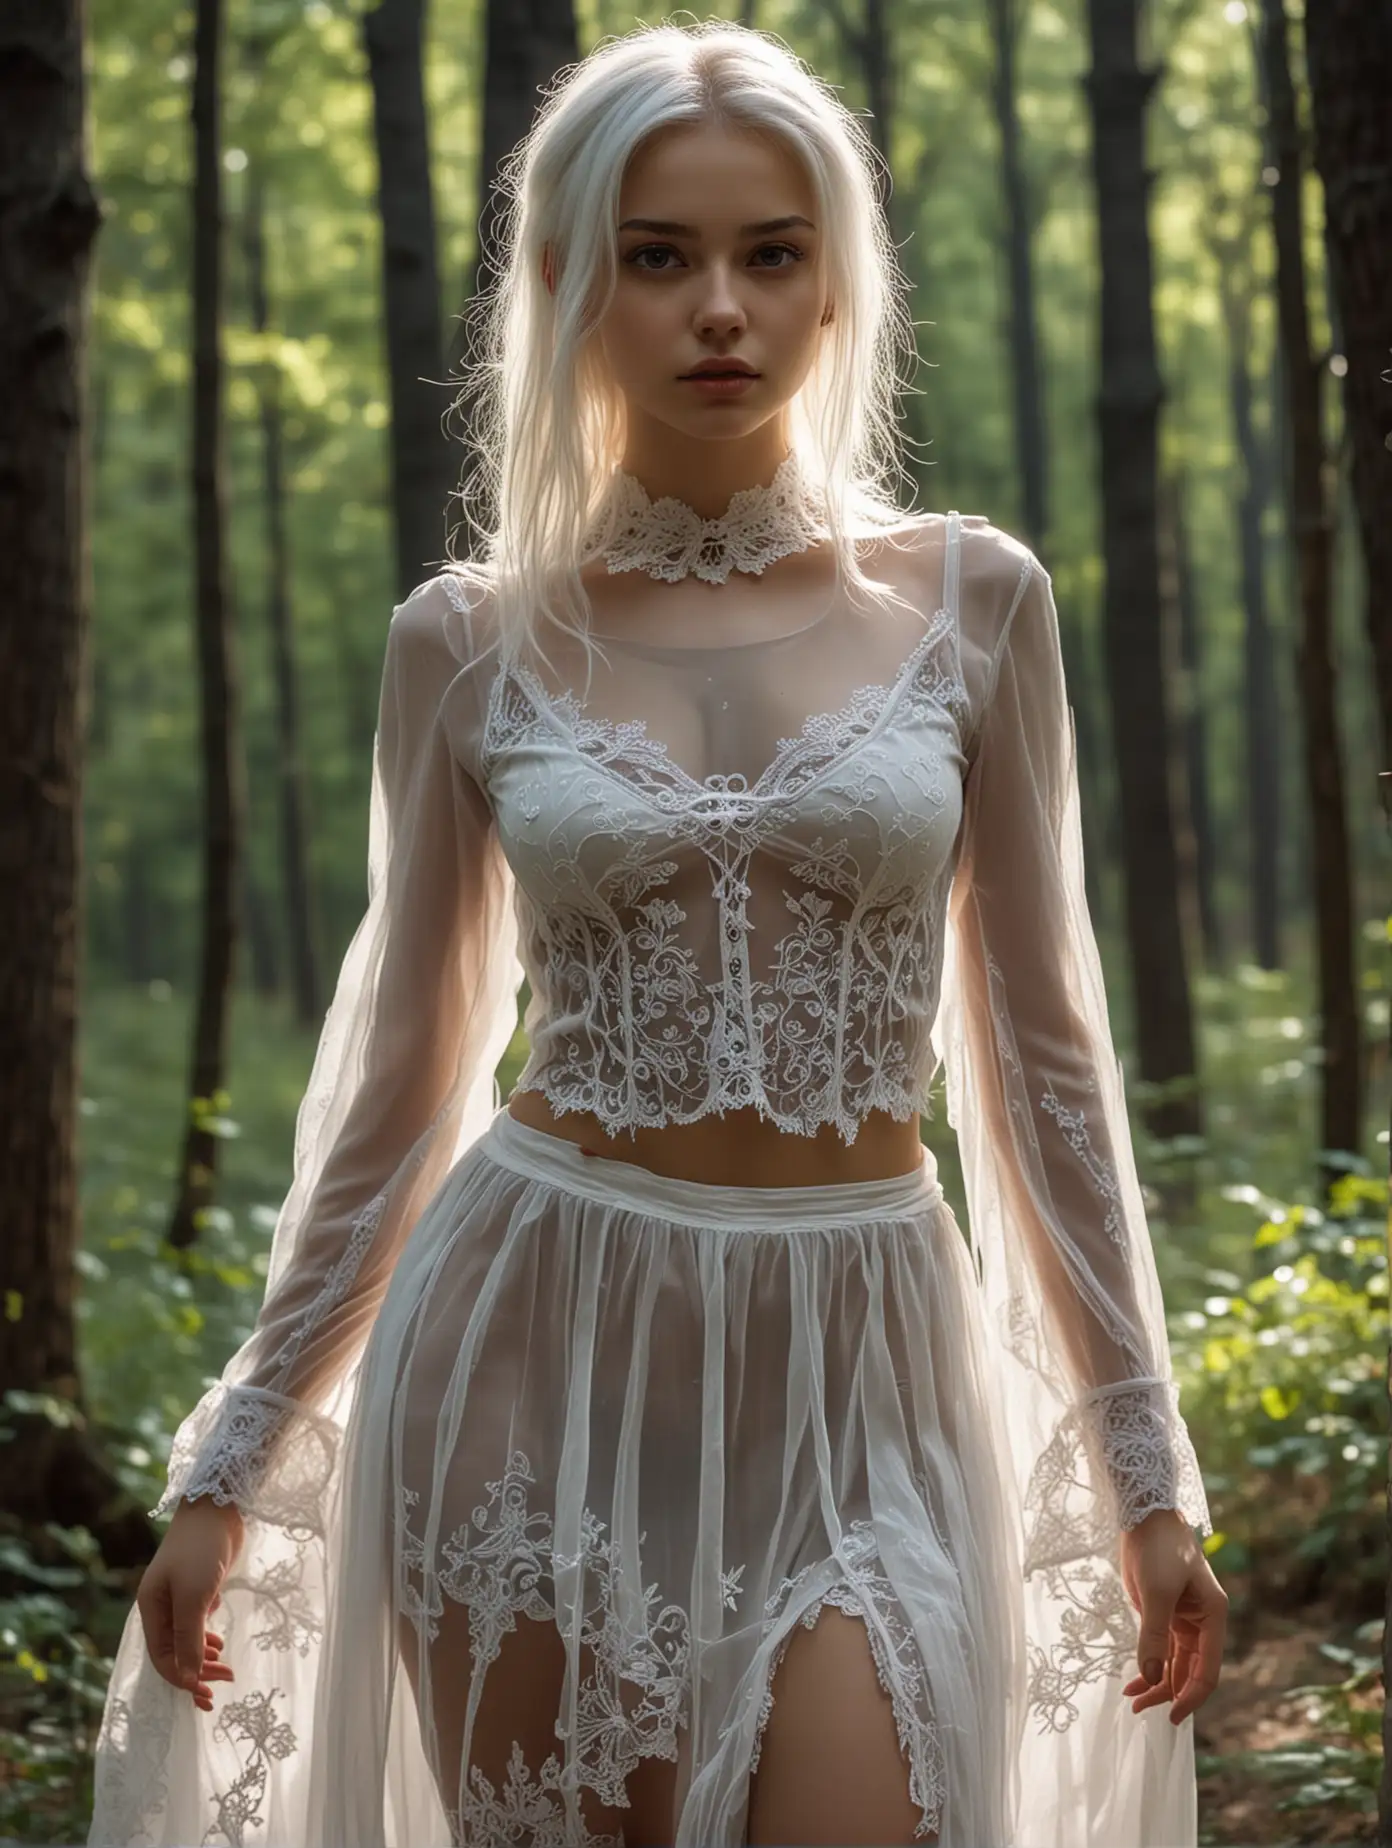 Sensual-Gothic-Forest-Photoshoot-with-Russian-Model-in-Sheer-White-Ensemble